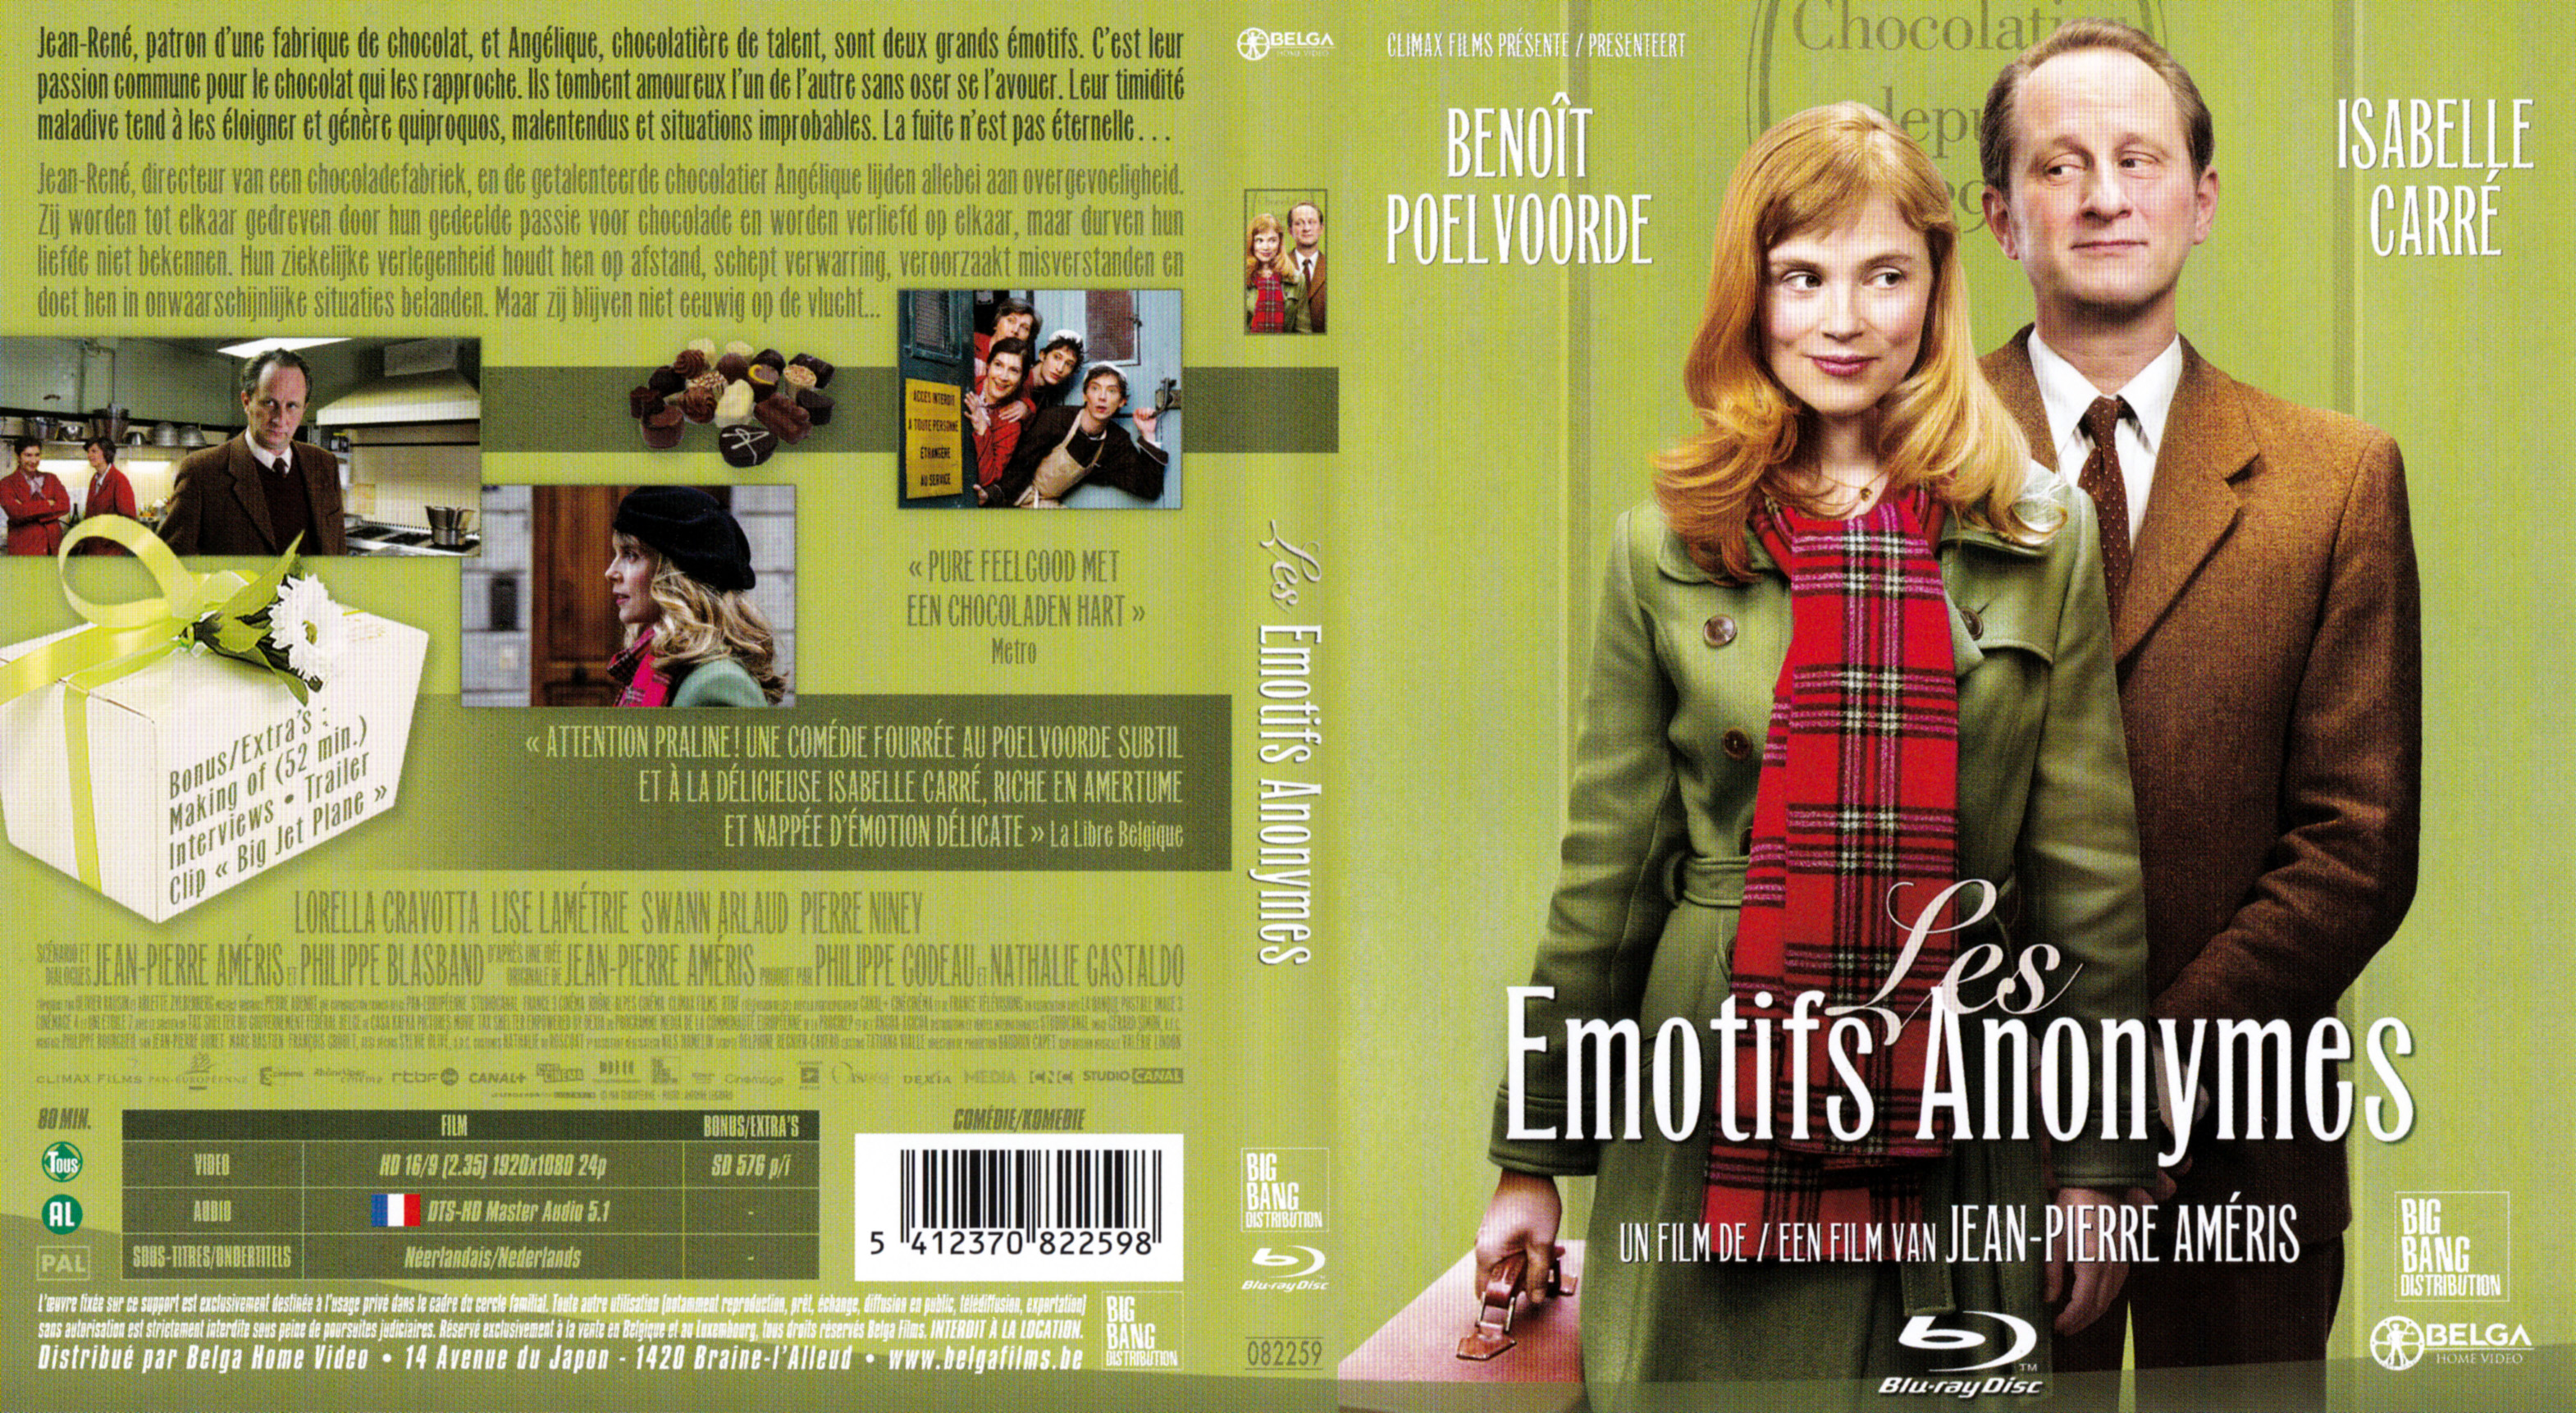 Jaquette DVD Les motifs anonymes (BLU-RAY)